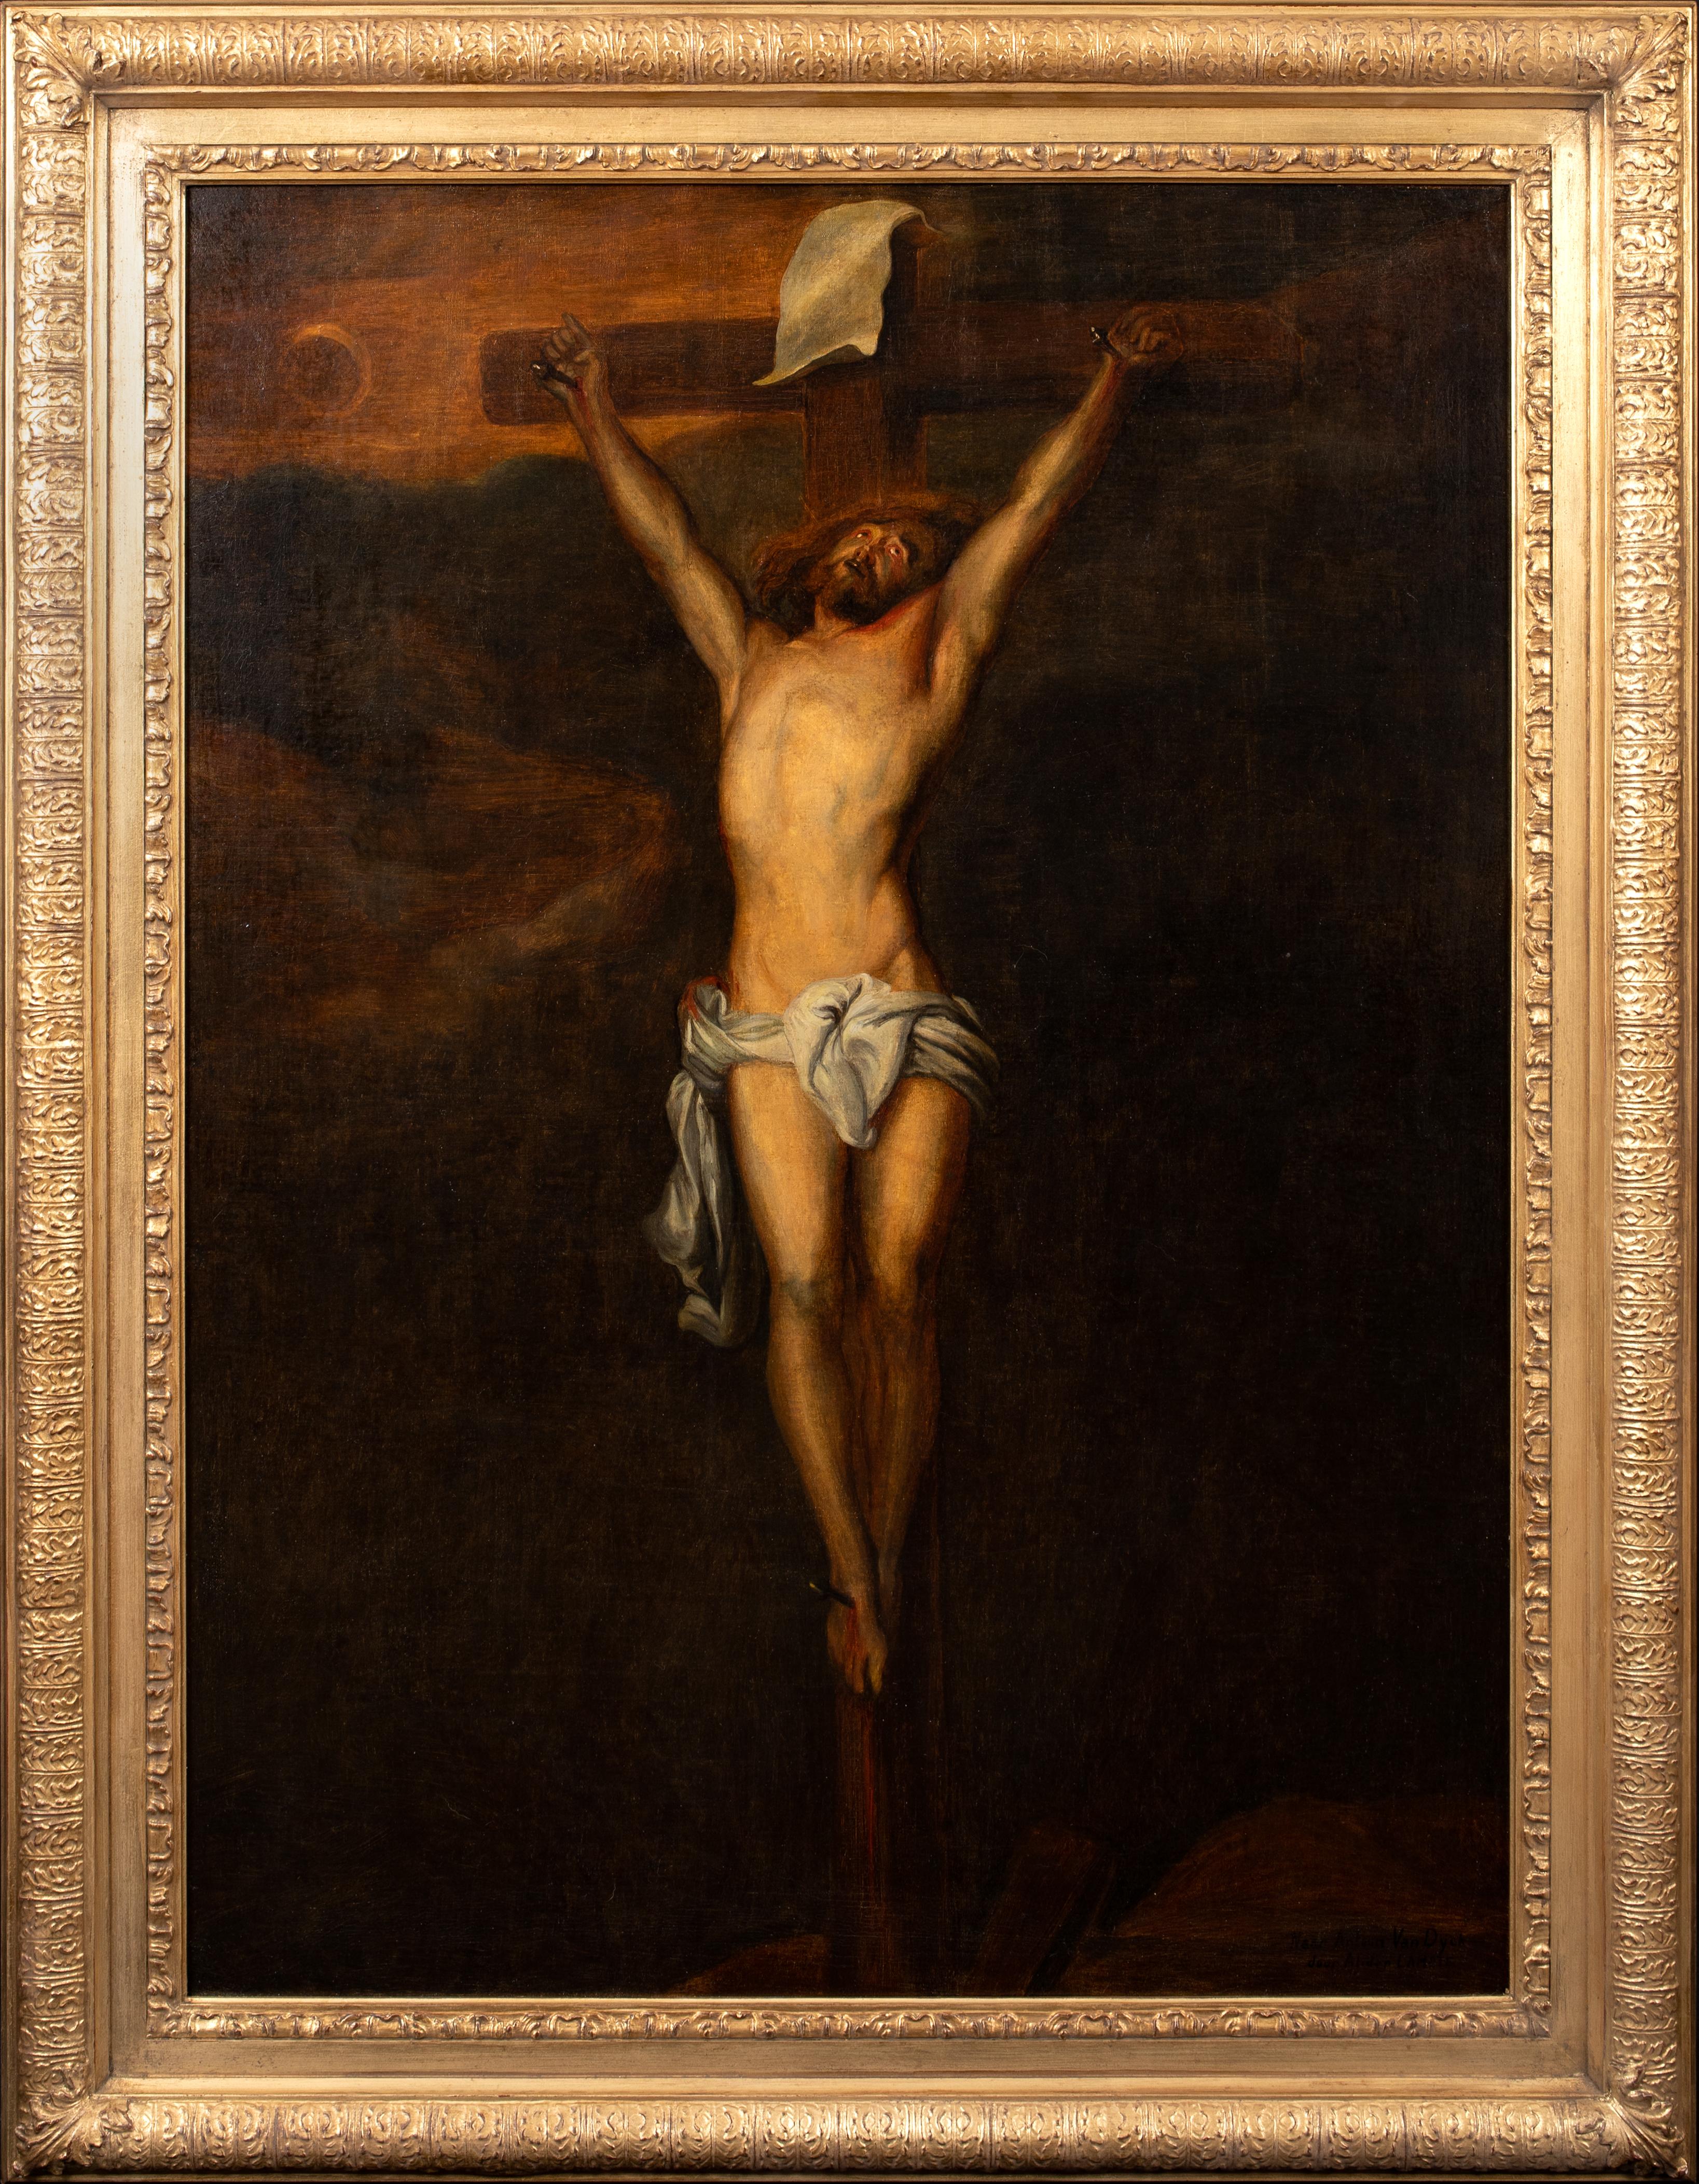 Anthony Van Dyck Portrait Painting - The Crucifixion, 17th Century   circle of Anthony VAN DYCK (1599-1641)